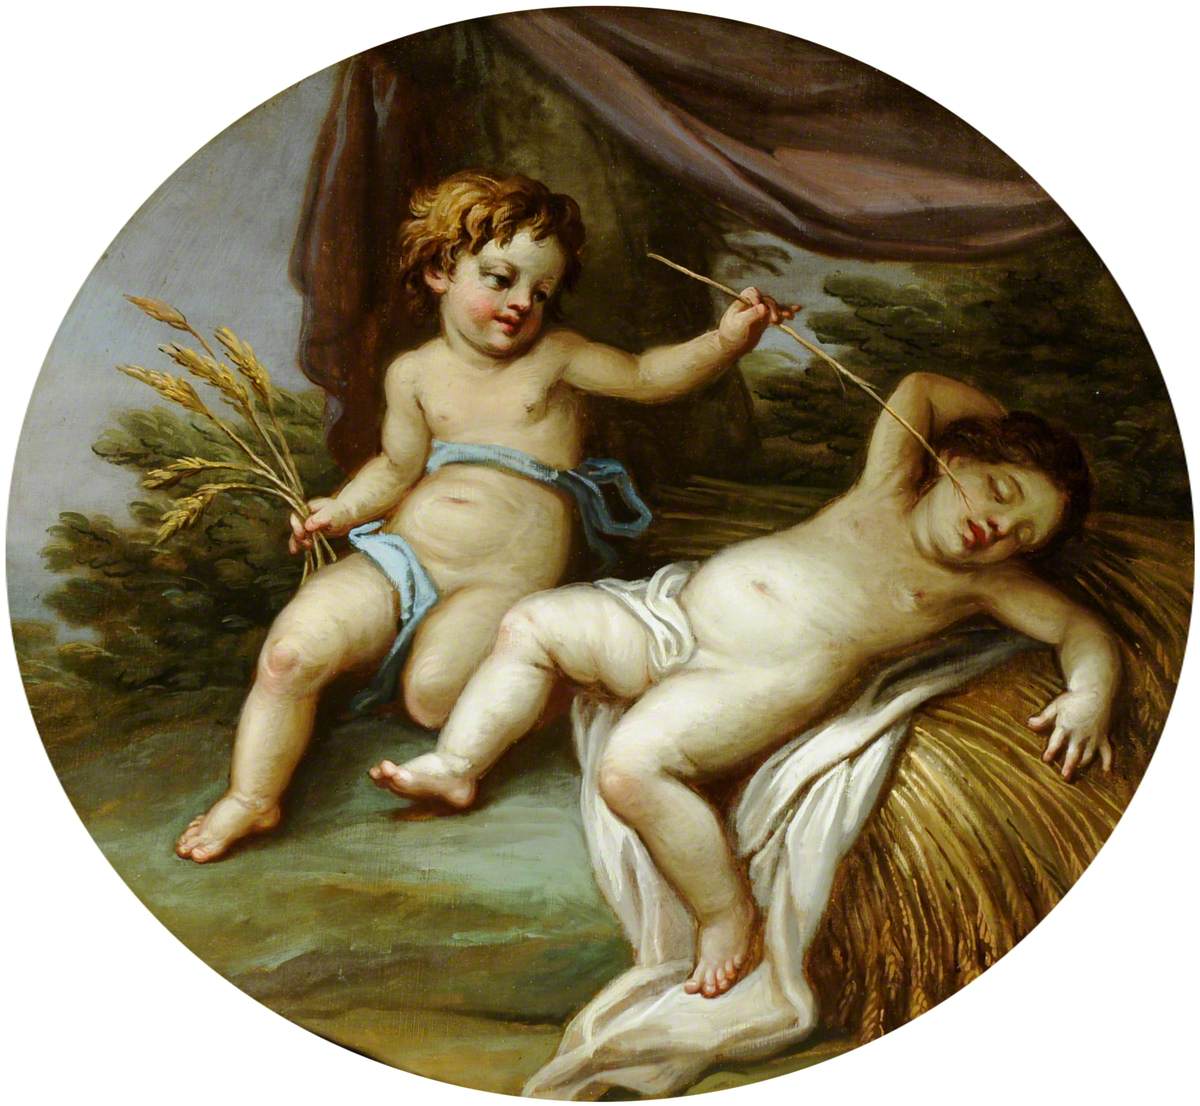 A Putto Being Woken from Sleep by Tickling of His Nose